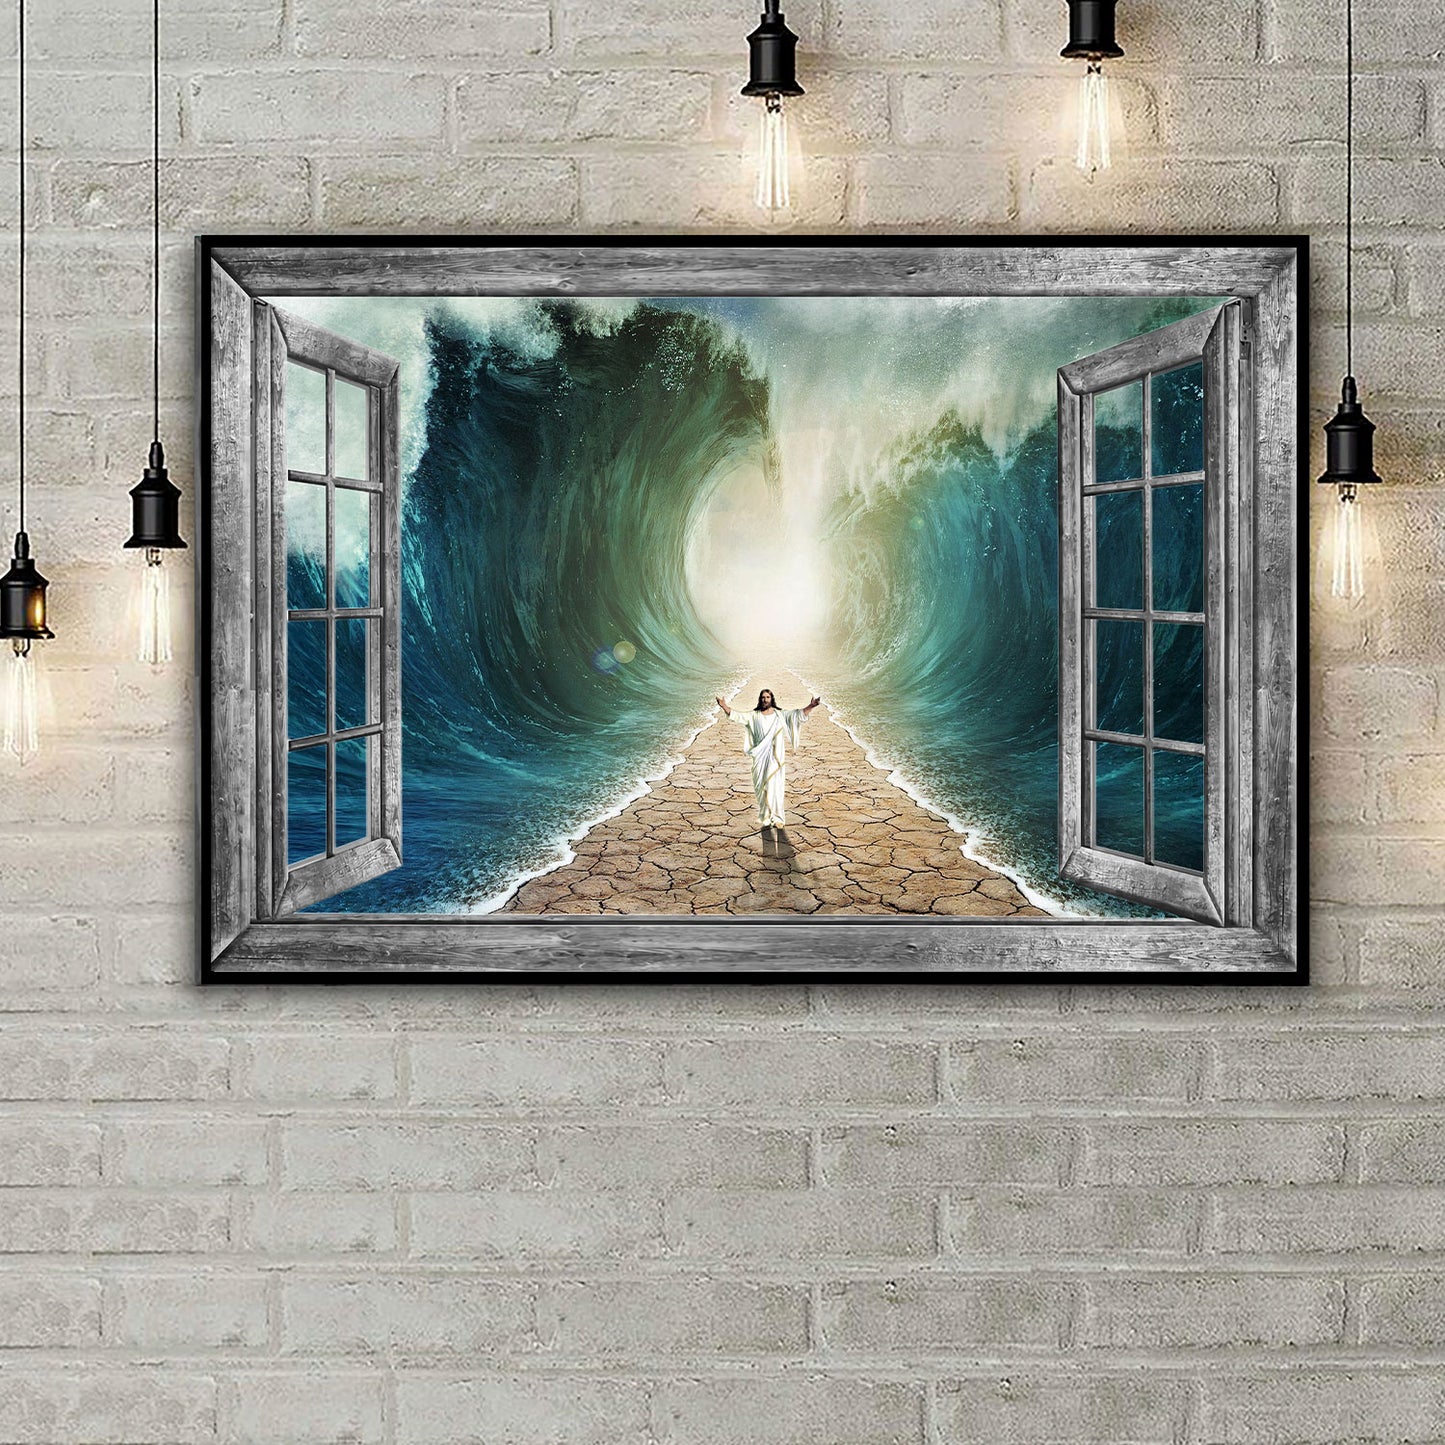 Parted Sea With Jesus WalKing On Dry Ground Window Frame Poster